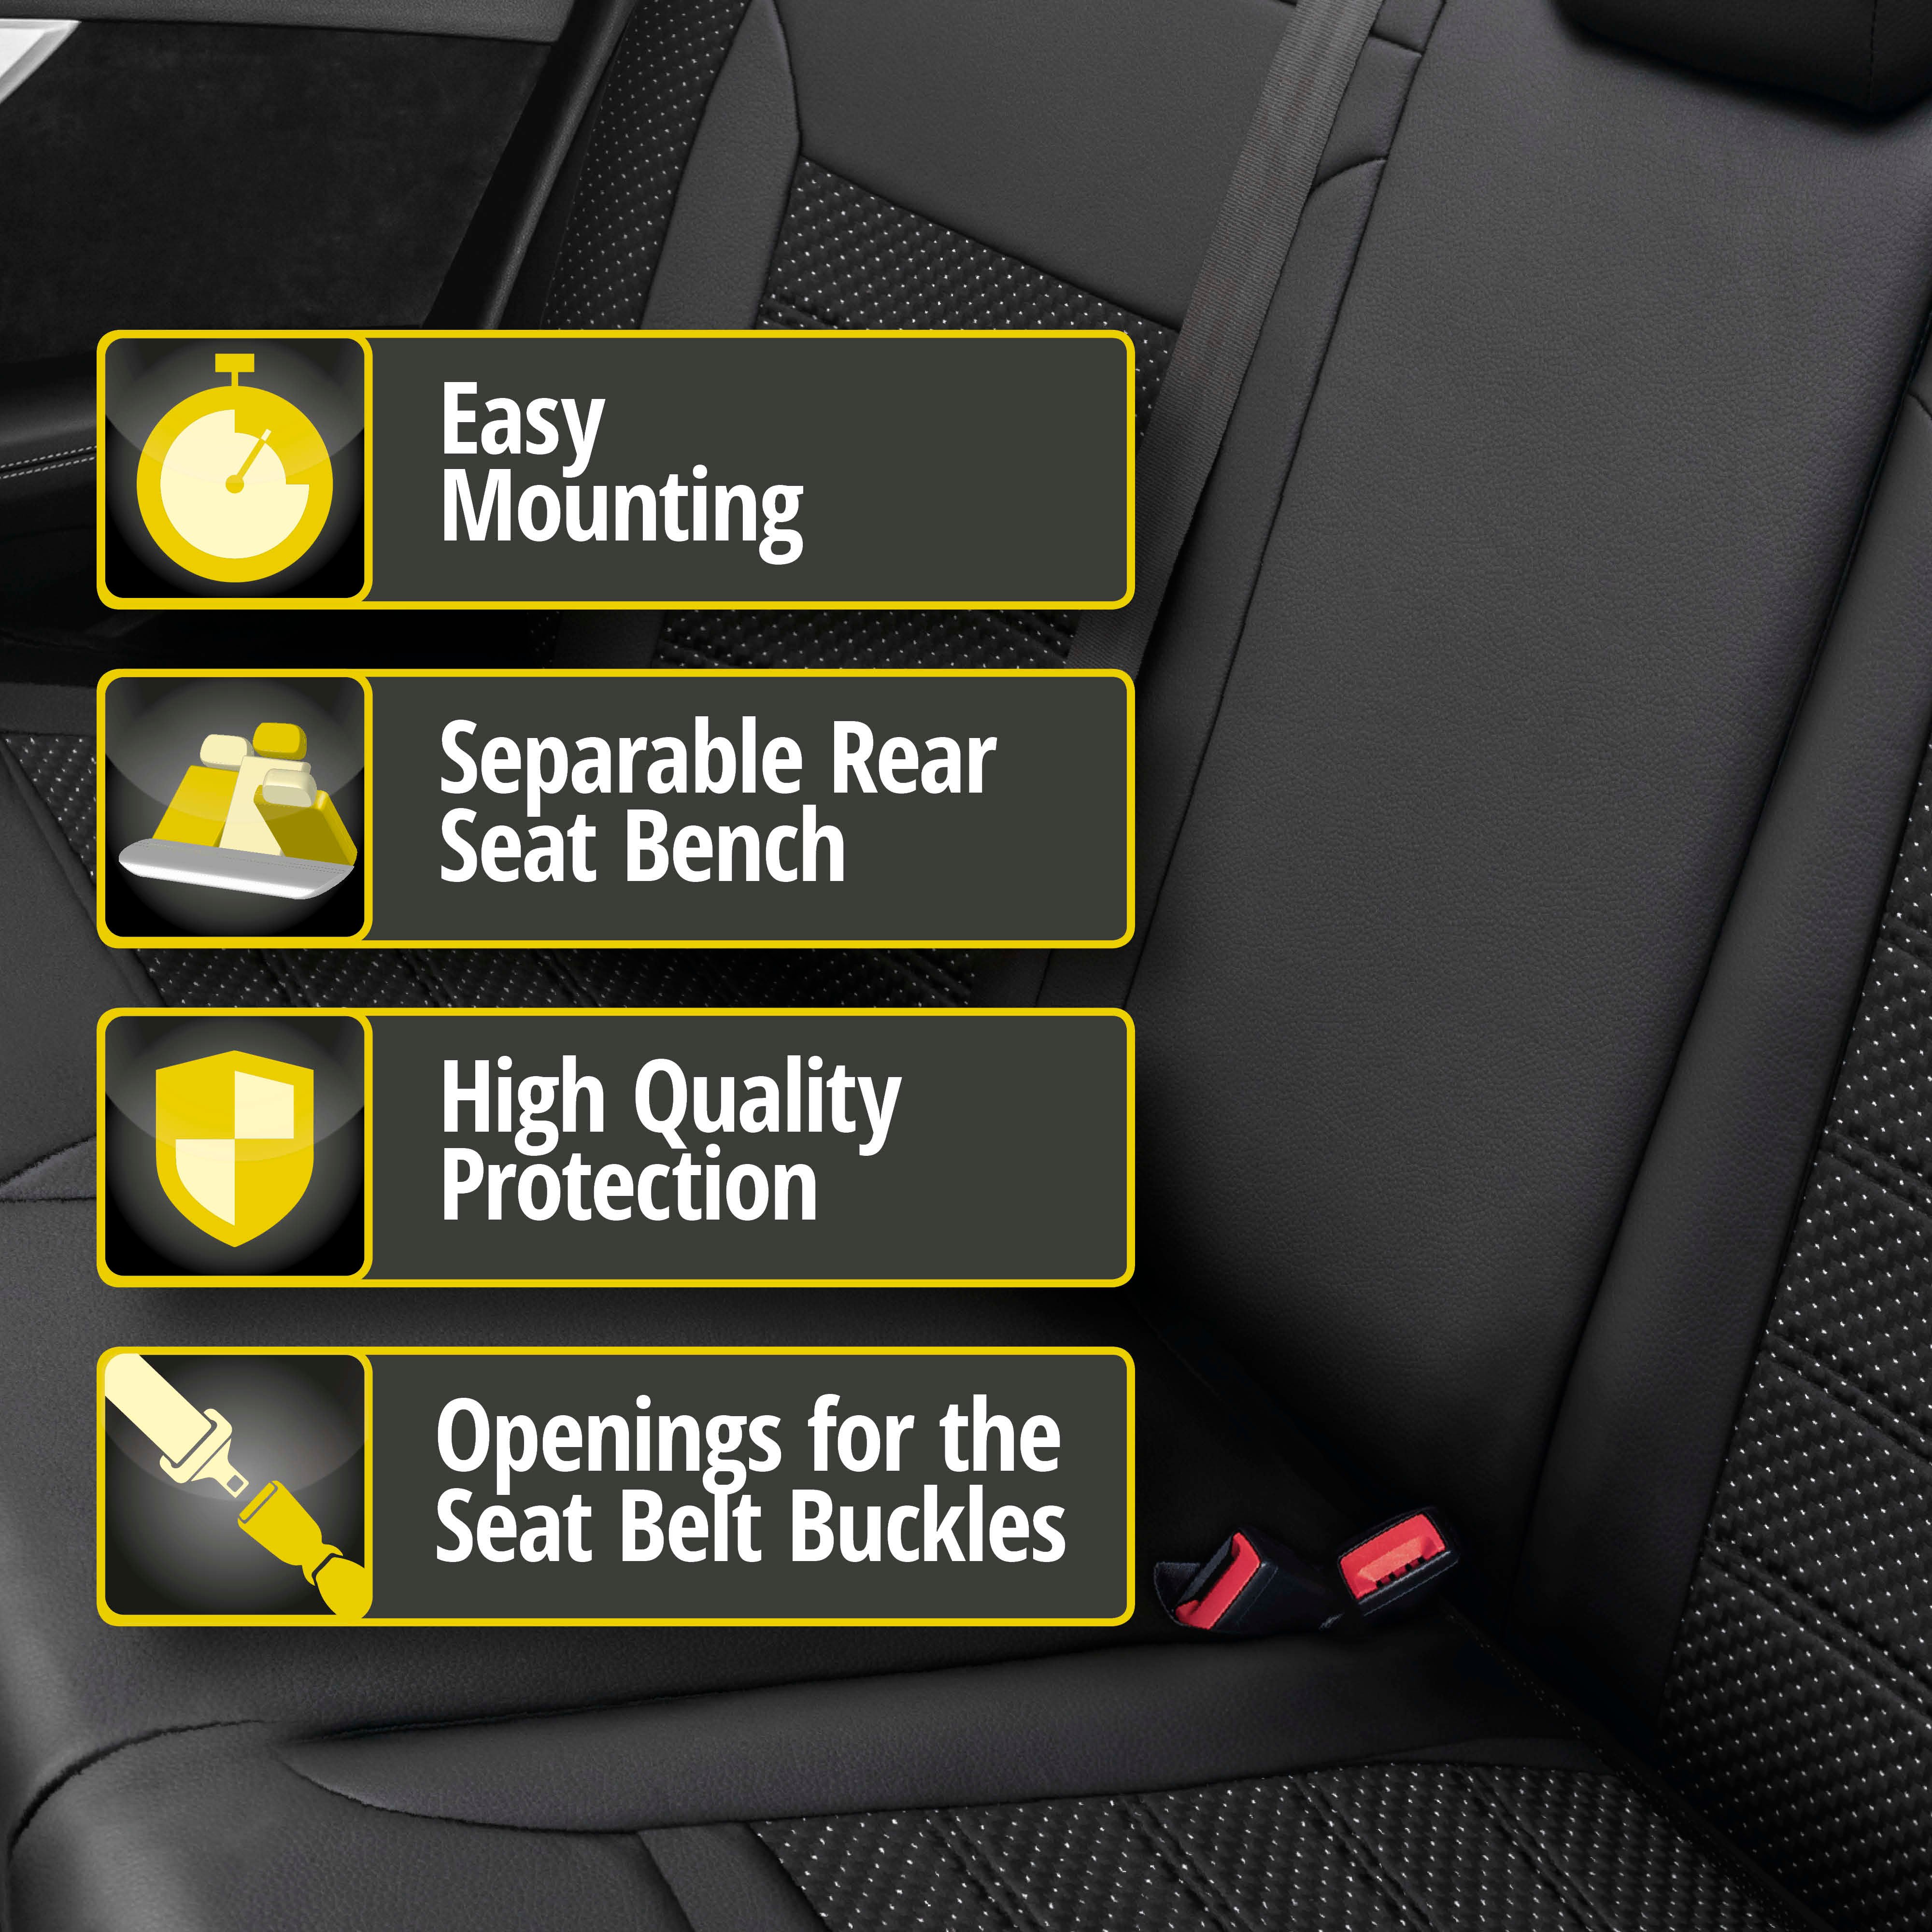 Seat cover Torino for VW Passat Trendline 2015 until Today - 1 rear Seat cover for normal seats